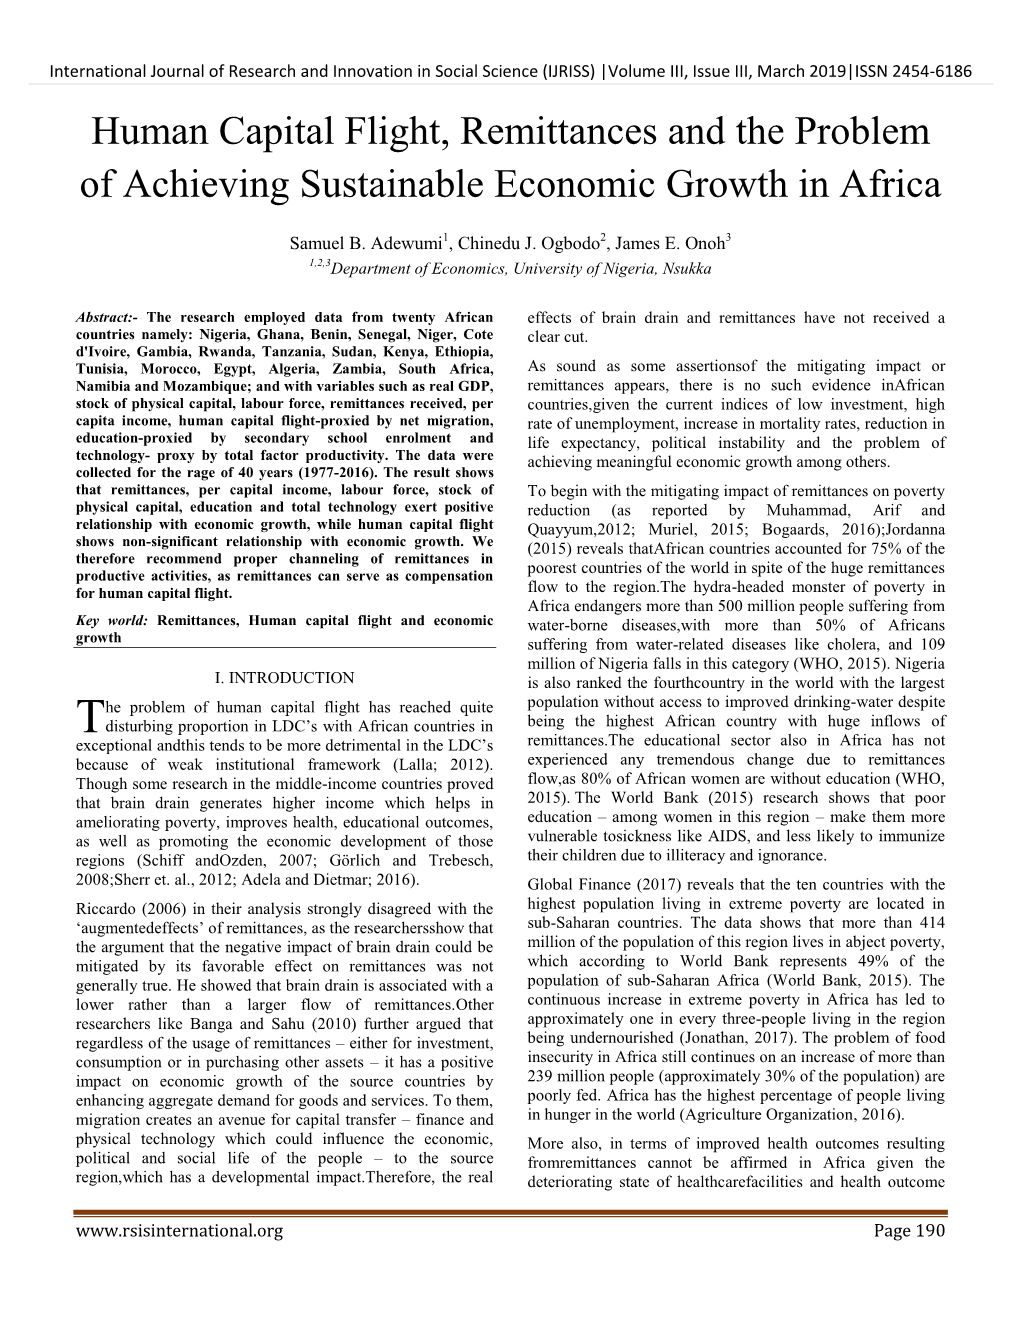 Human Capital Flight, Remittances and the Problem of Achieving Sustainable Economic Growth in Africa